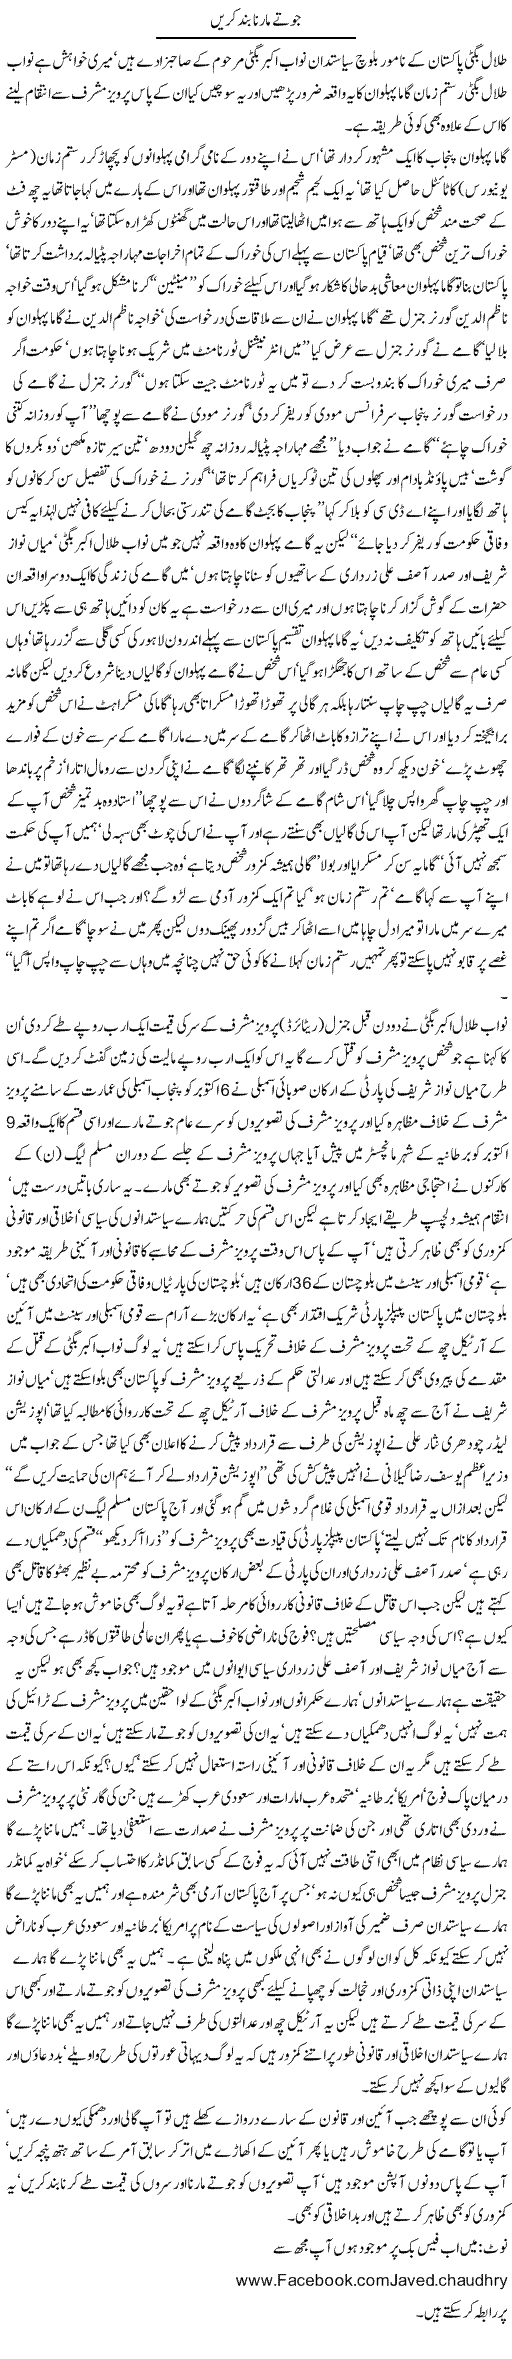 Hitting Shoes Express Column Javed Chaudhry 12 October 2010